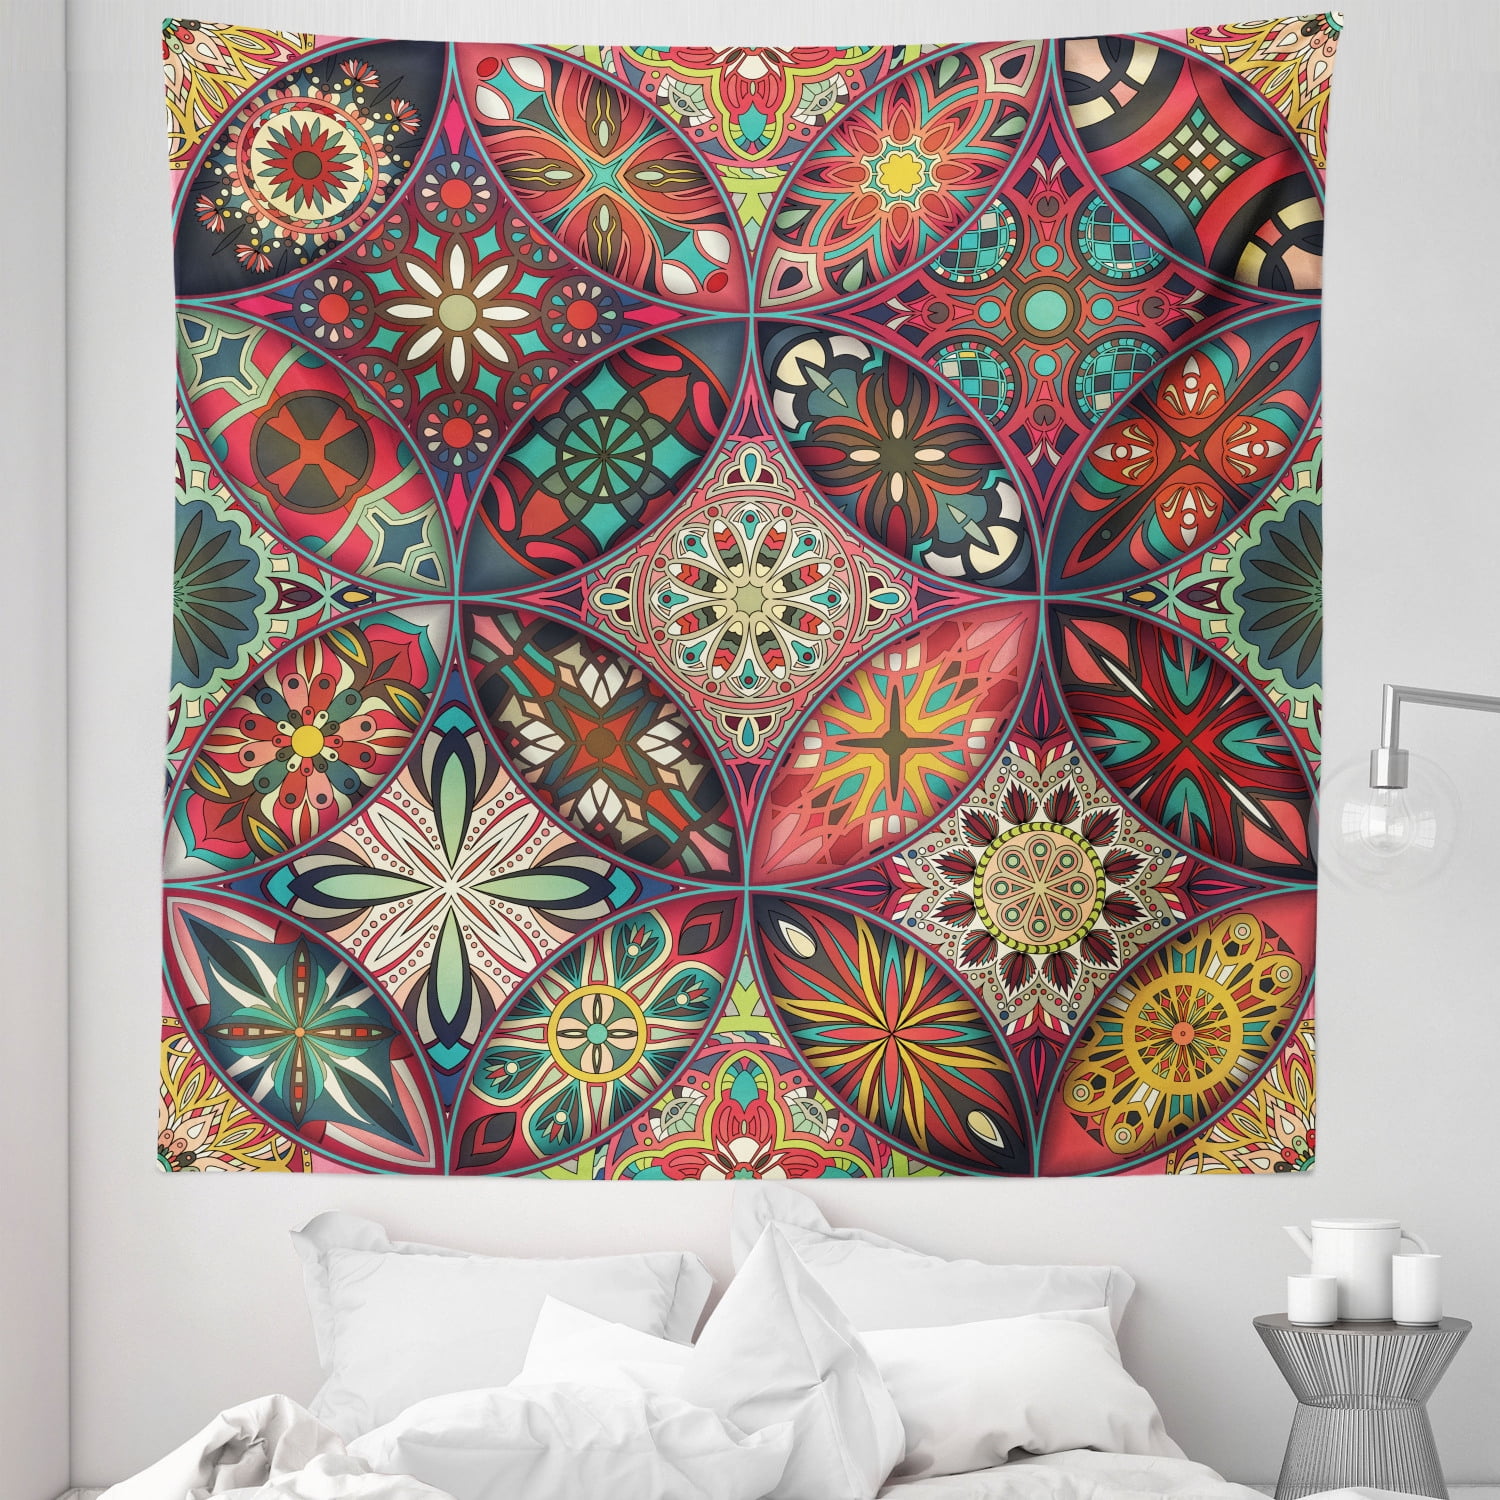 Tapestry Dream Catcher Tie Dye Wall Hanging Poster Hippie Home Decor Ethnic New 